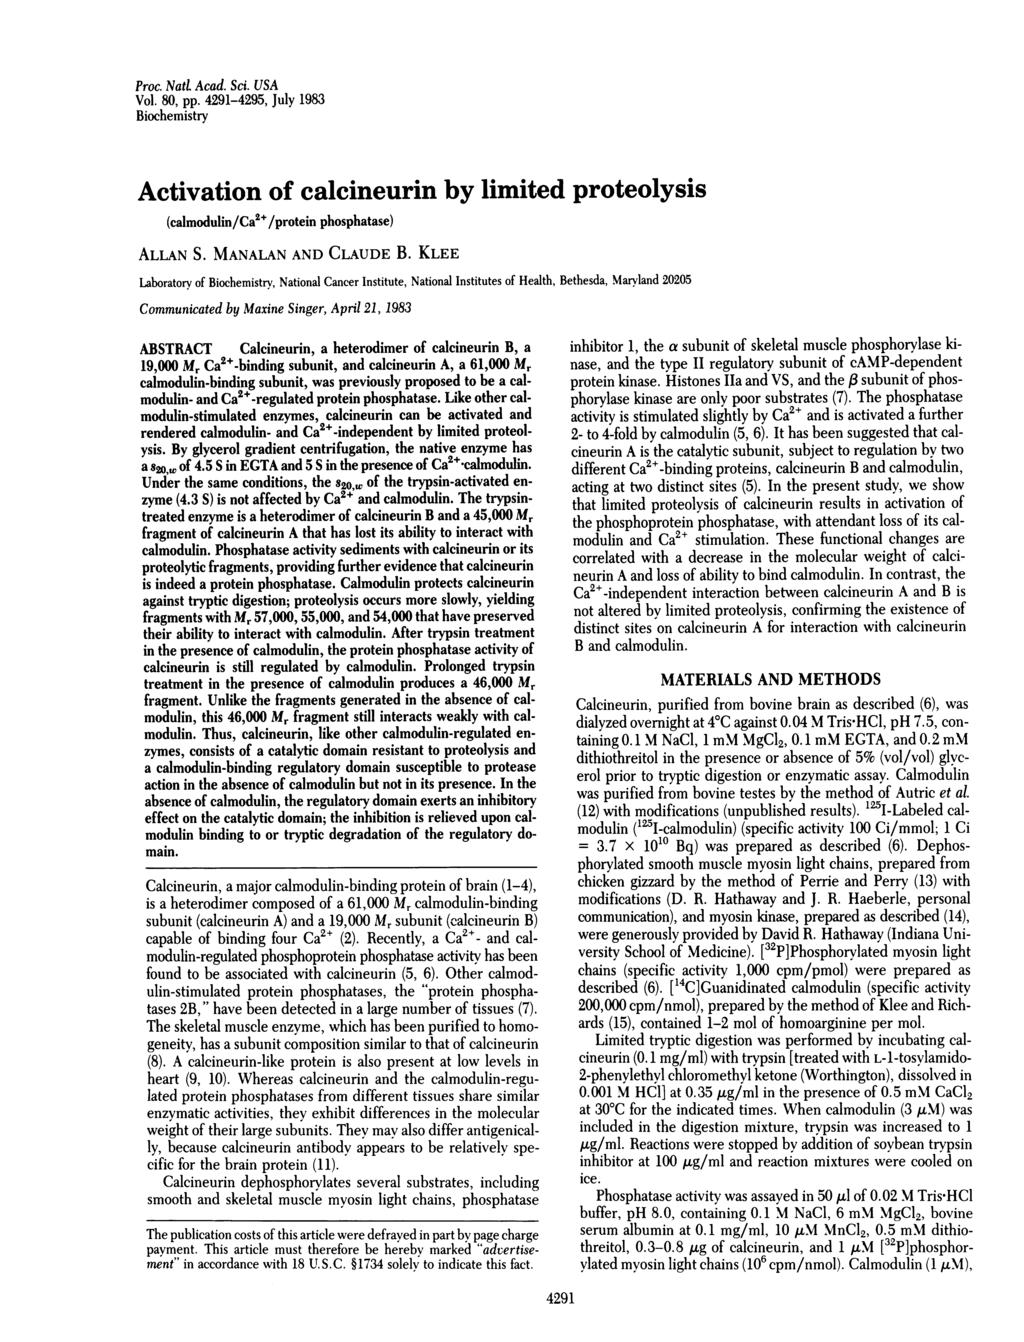 Proc. NatW Acad. Sci. USA Vol. 8, pp. 4291-4295, July 1983 Biochemistry Activation of calcineurin by limited proteolysis (calmodulin/ca2+/protein phosphatase) ALLAN S. MANALAN AND CLAUDE B.